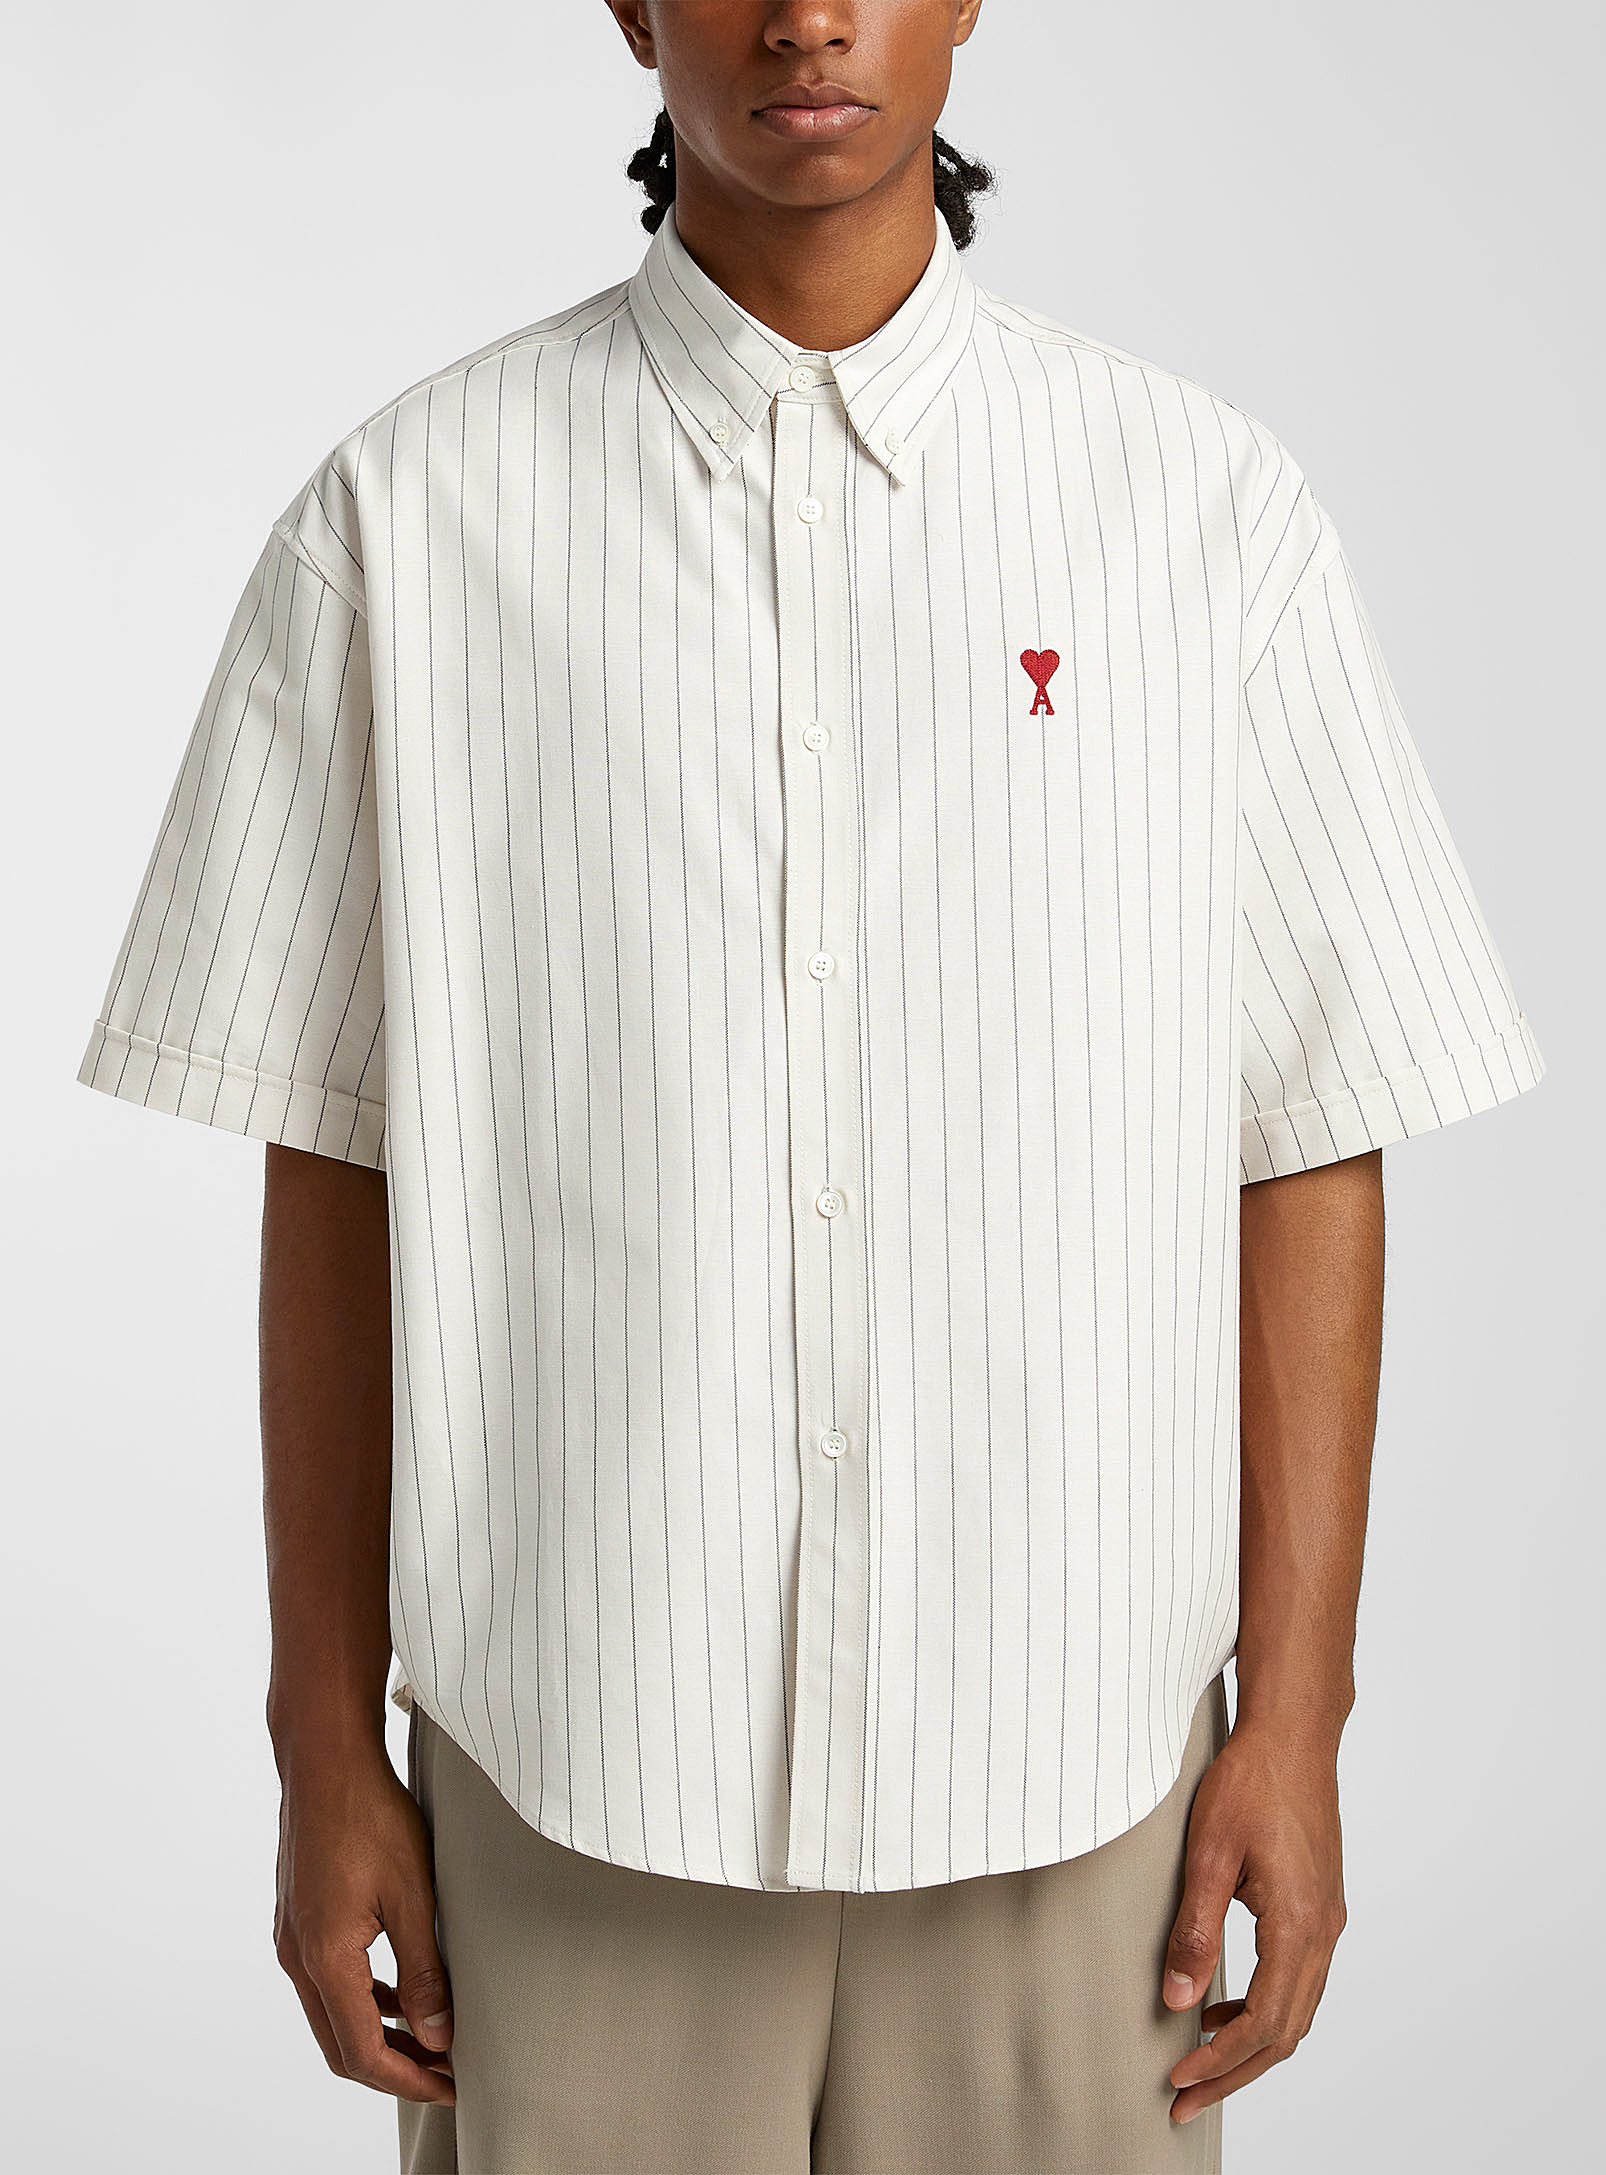 Ami - Men's Embroidered logo striped shirt